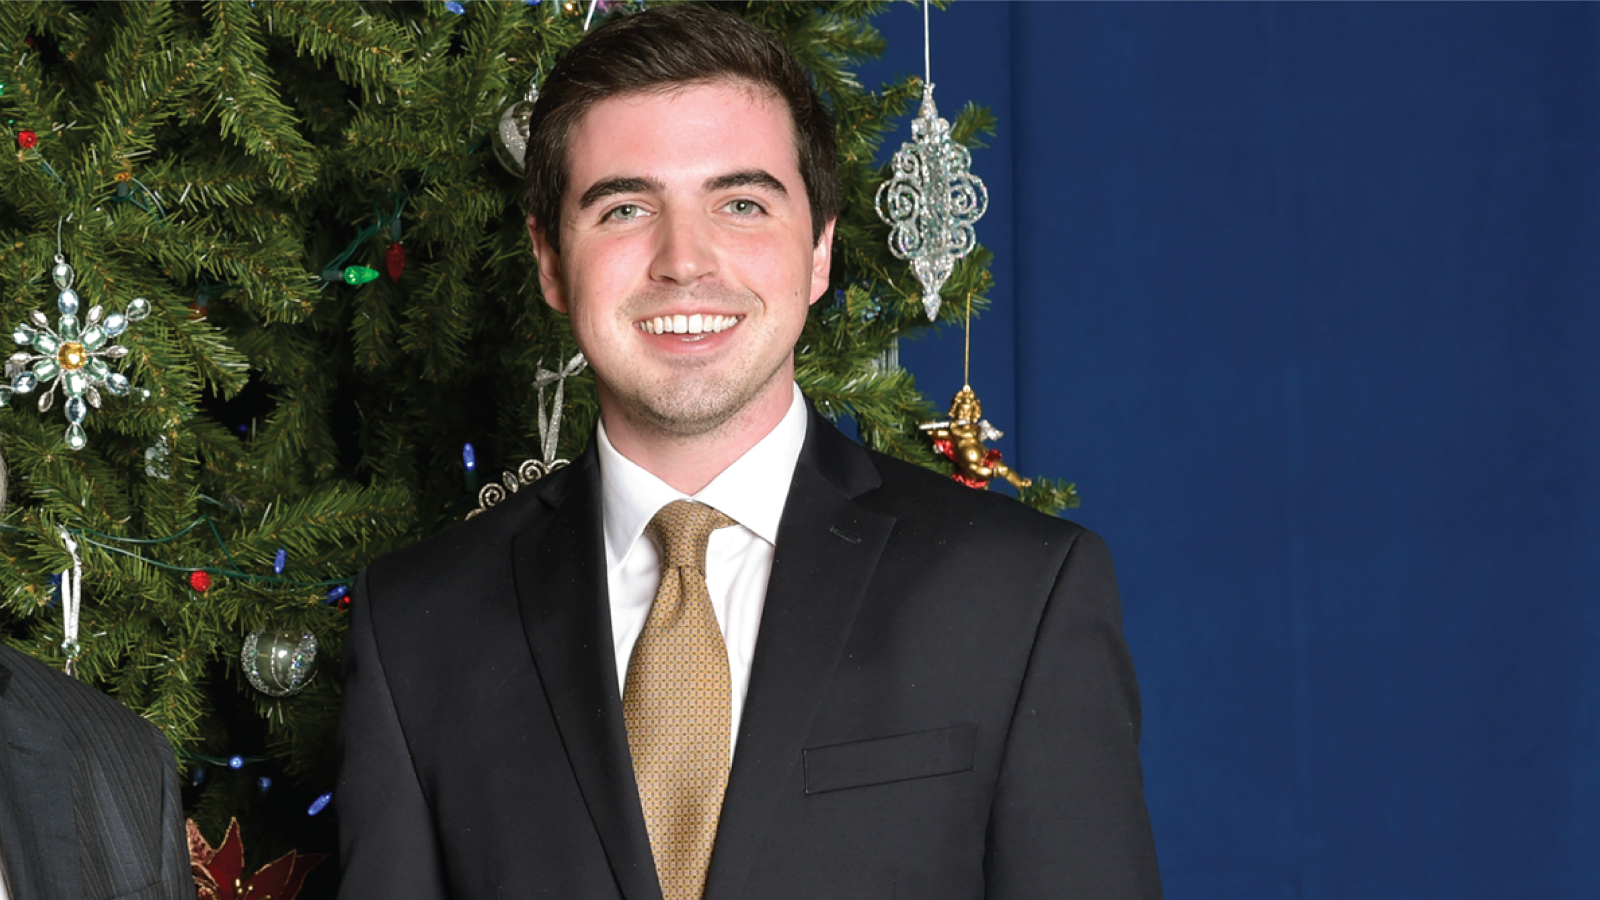 Sean O'Brien smiles in a suit in front of a Christmas tree